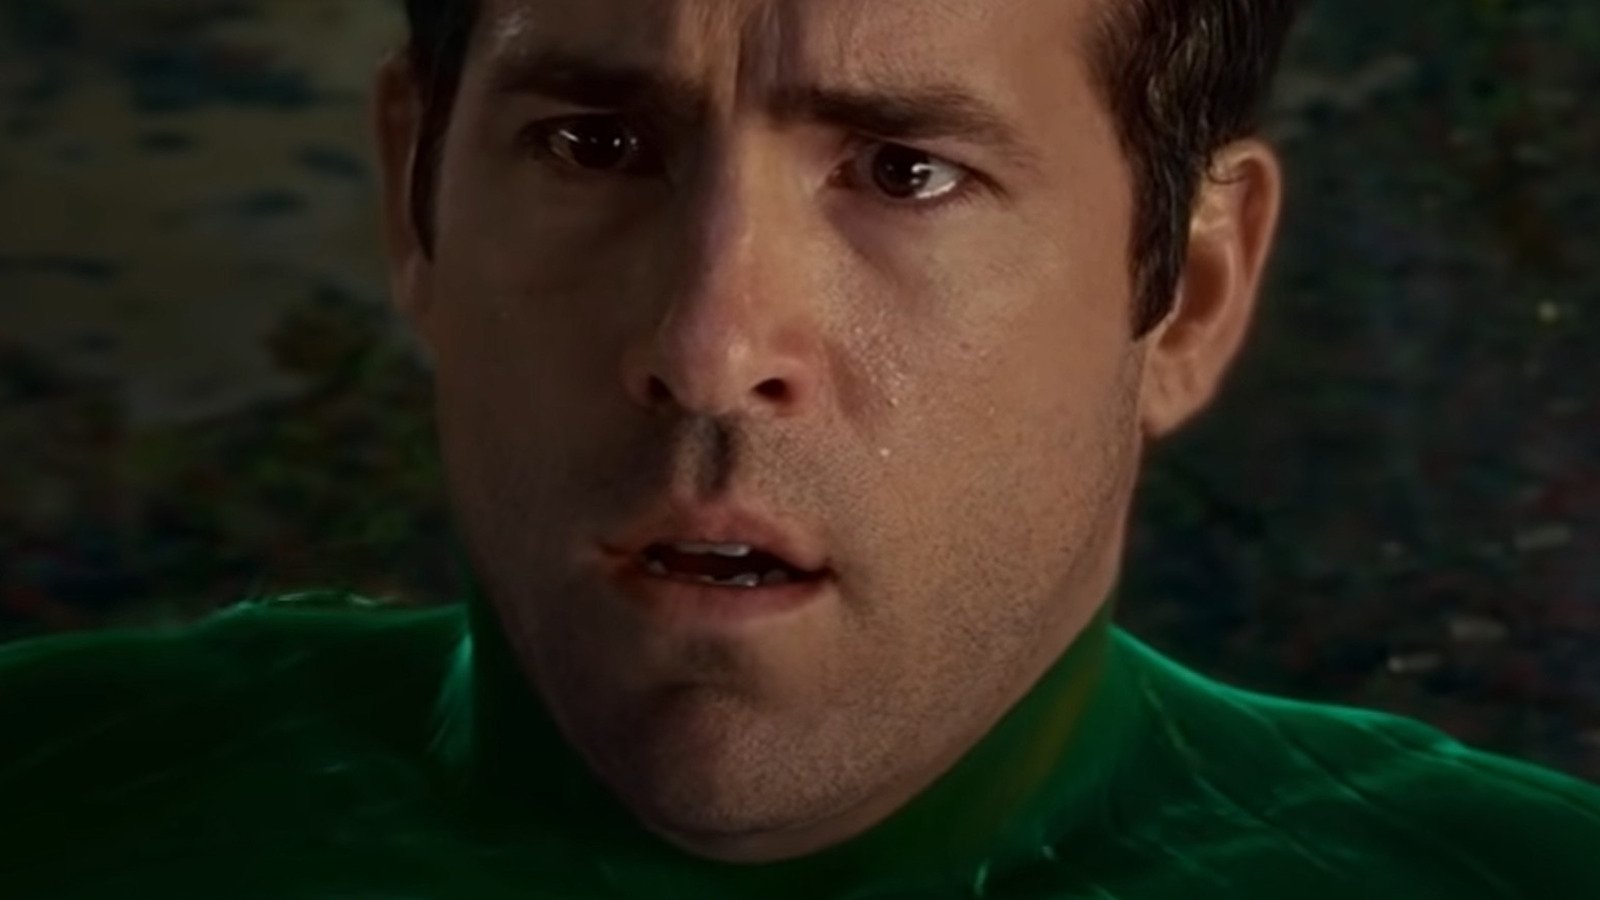 The Green Lantern Costume Probably Shouldn't Have Been Greenlit - Looper